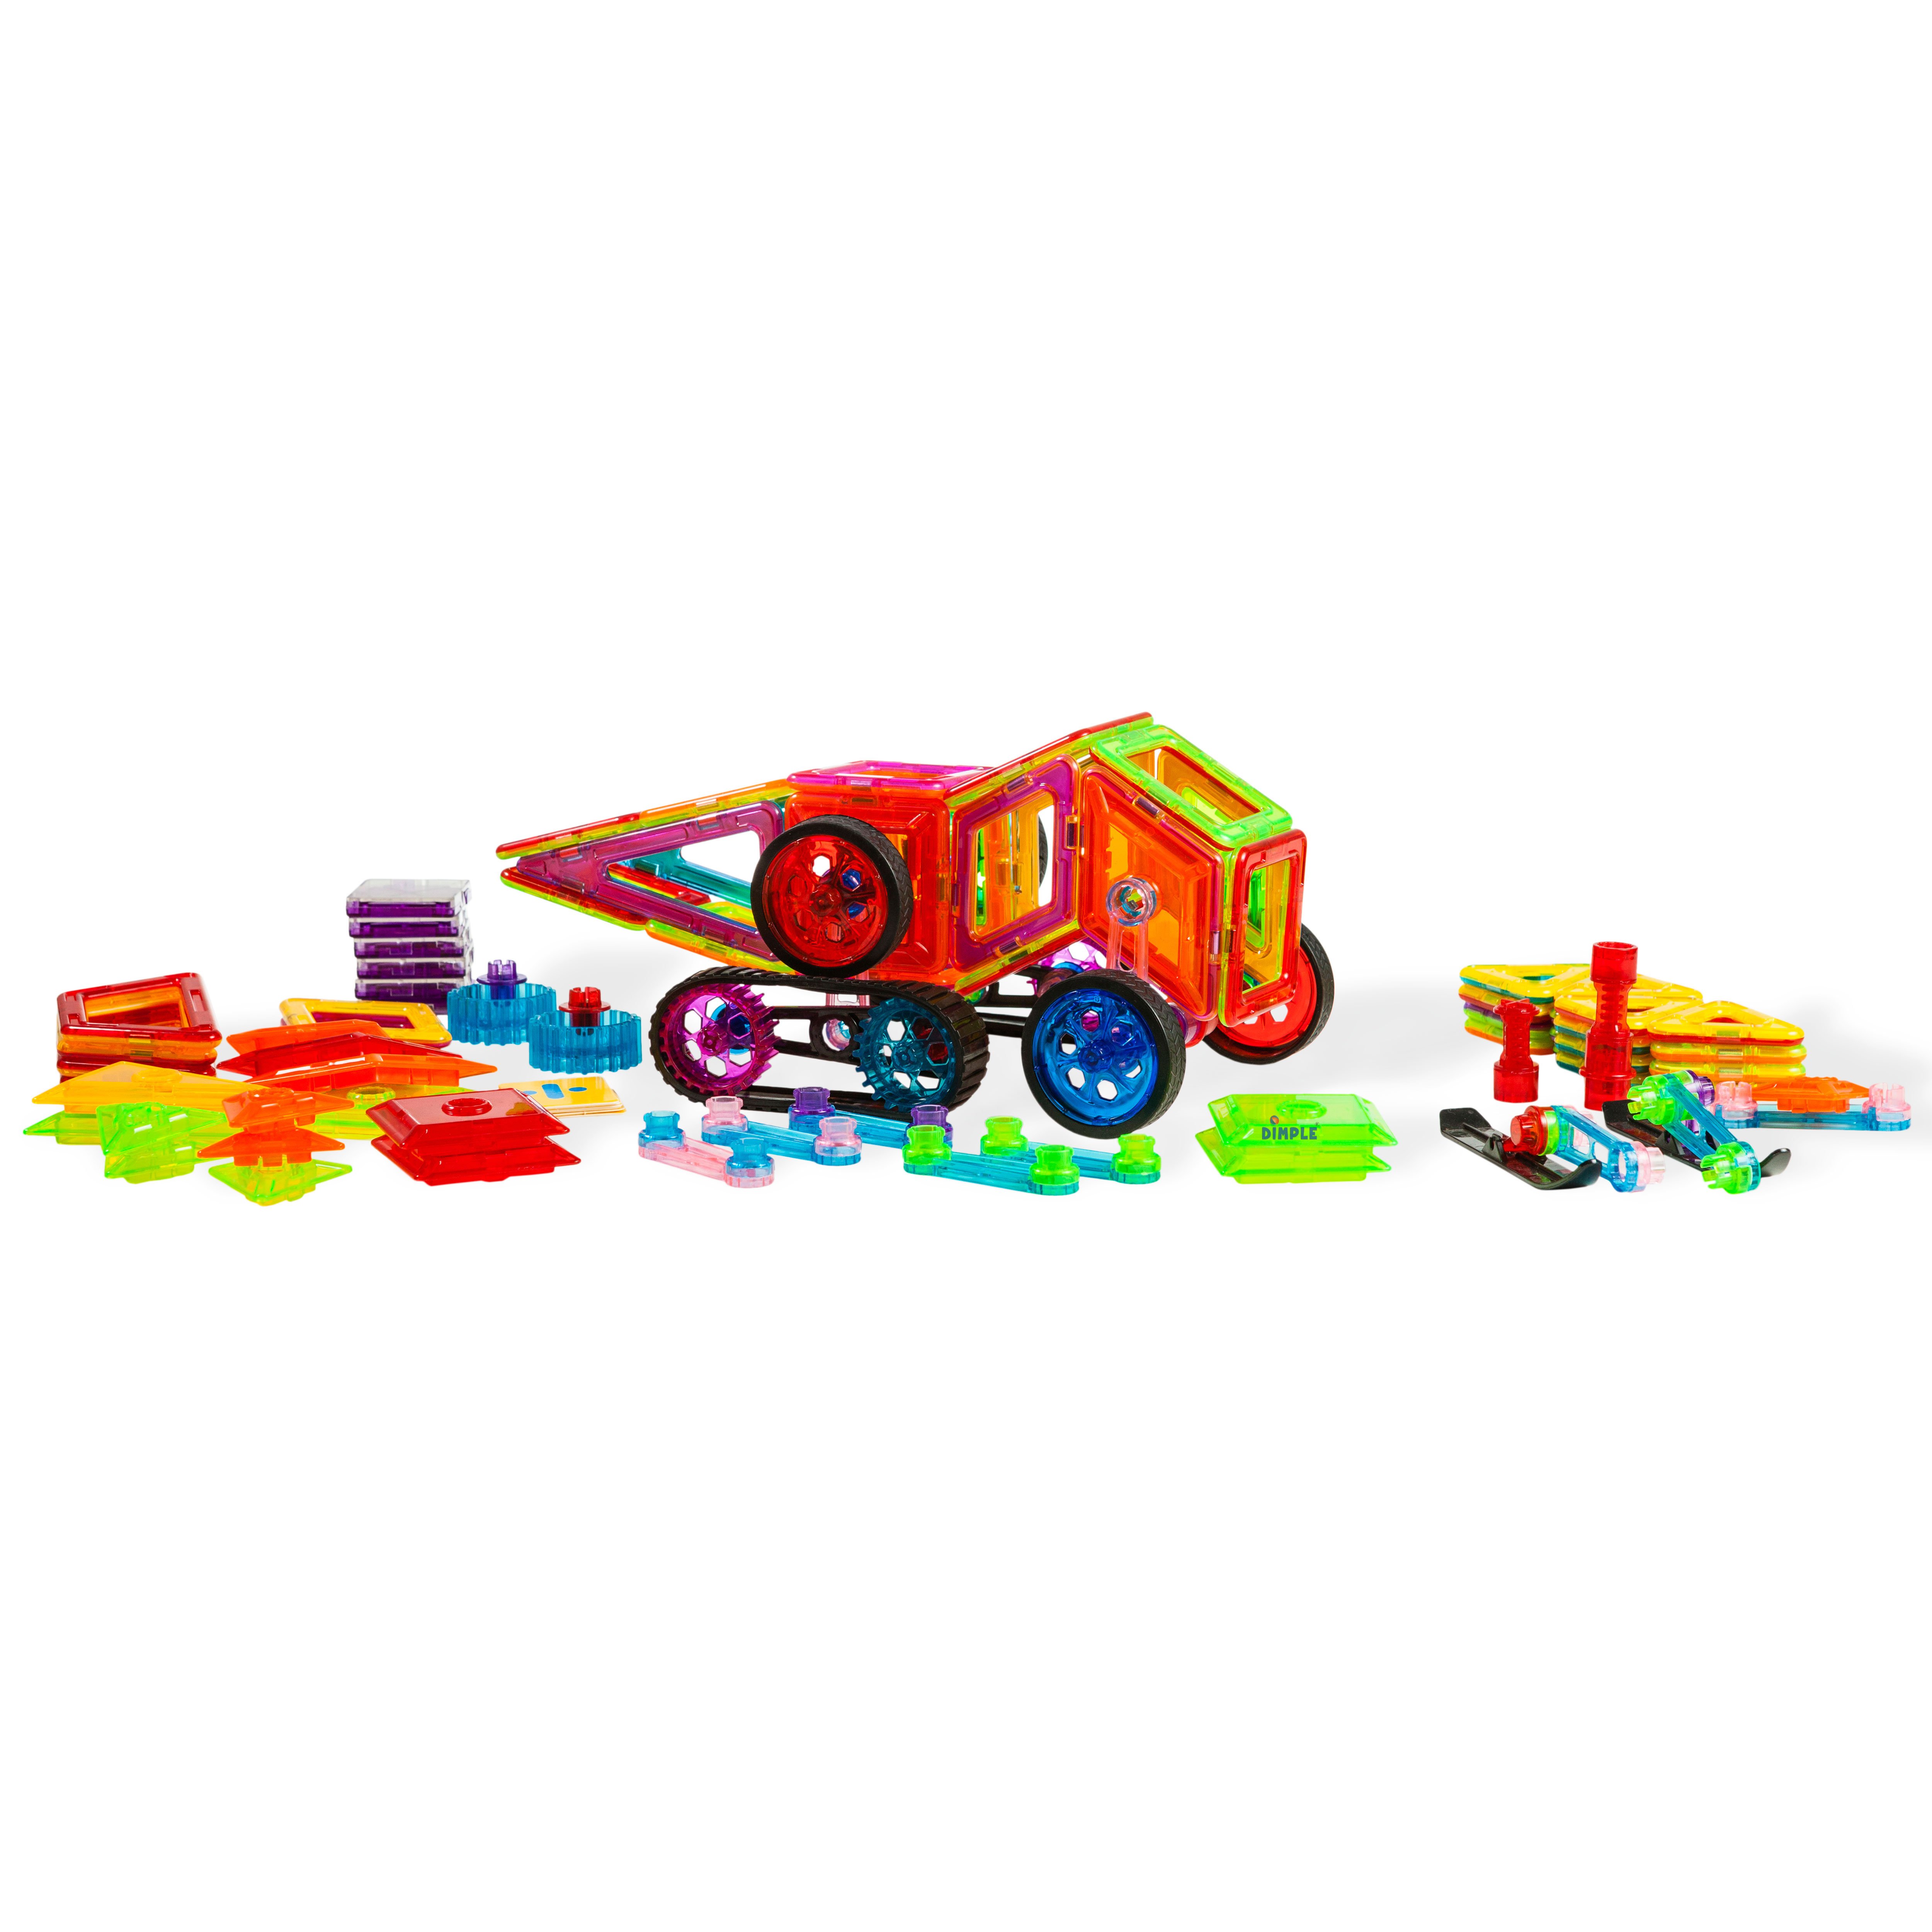 Magneticals Magnet Toys Tile Set (98-Piece Set) Stack, Create And Learn Imagination Magnetic Building Toys For Kids Children Creativity Gift